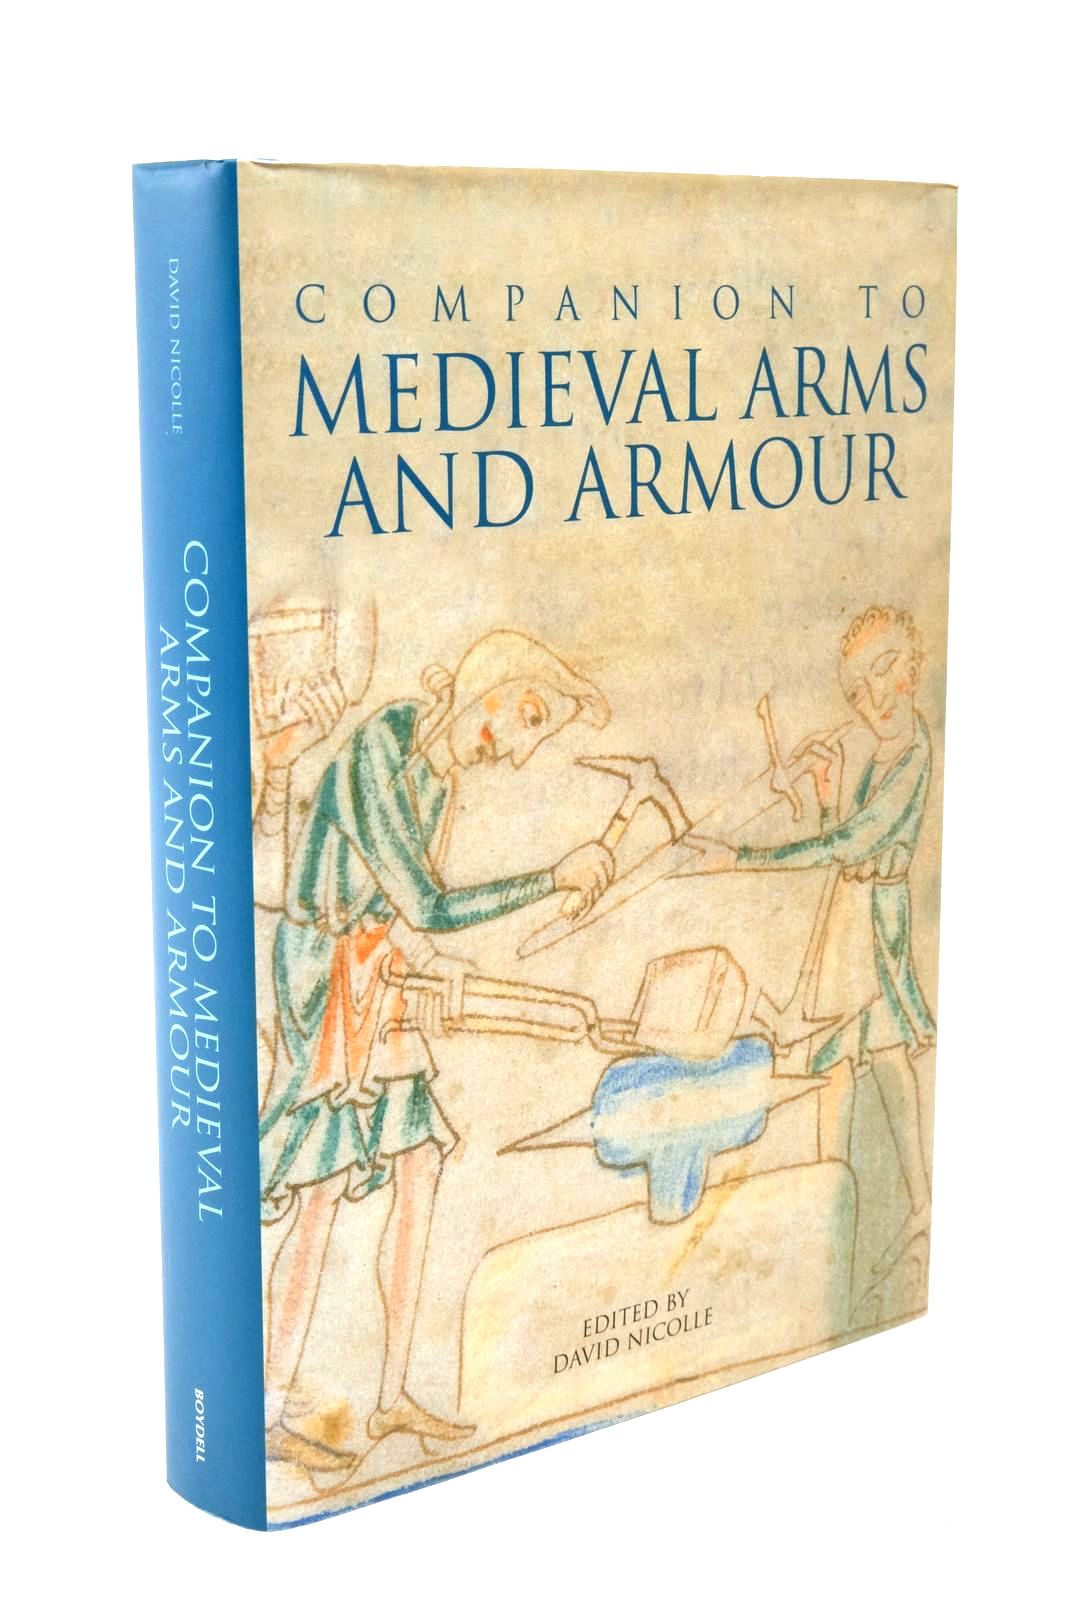 Photo of COMPANION TO MEDIEVAL ARMS AND ARMOUR- Stock Number: 1322593